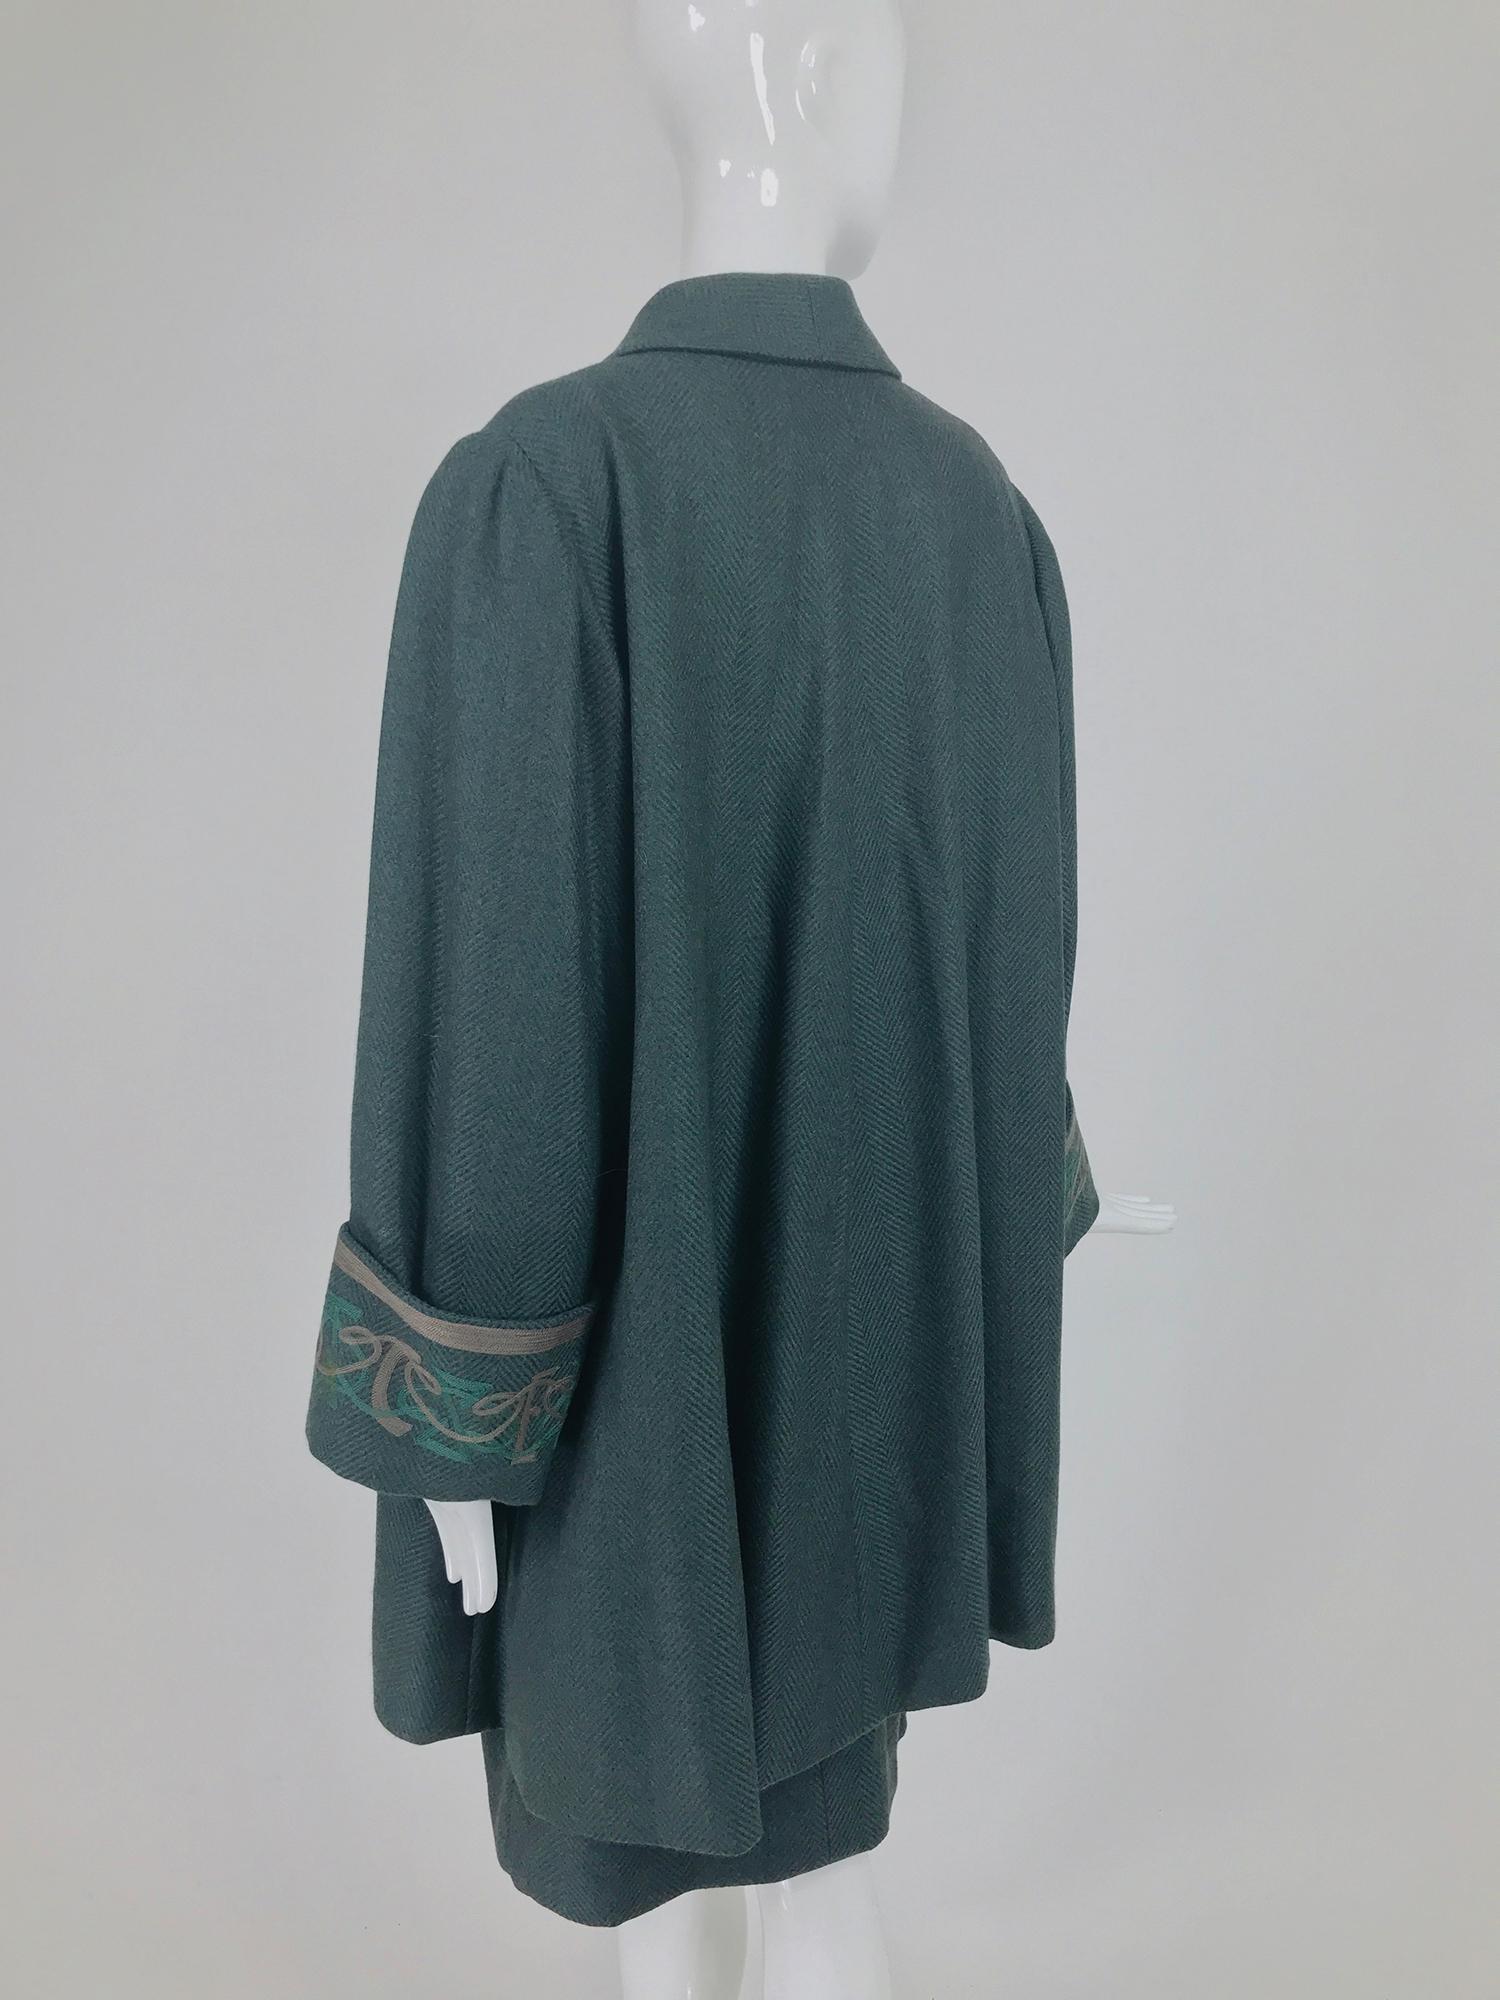 Chloe embroidered teal wool swing jacket and skirt from the 1980s 2